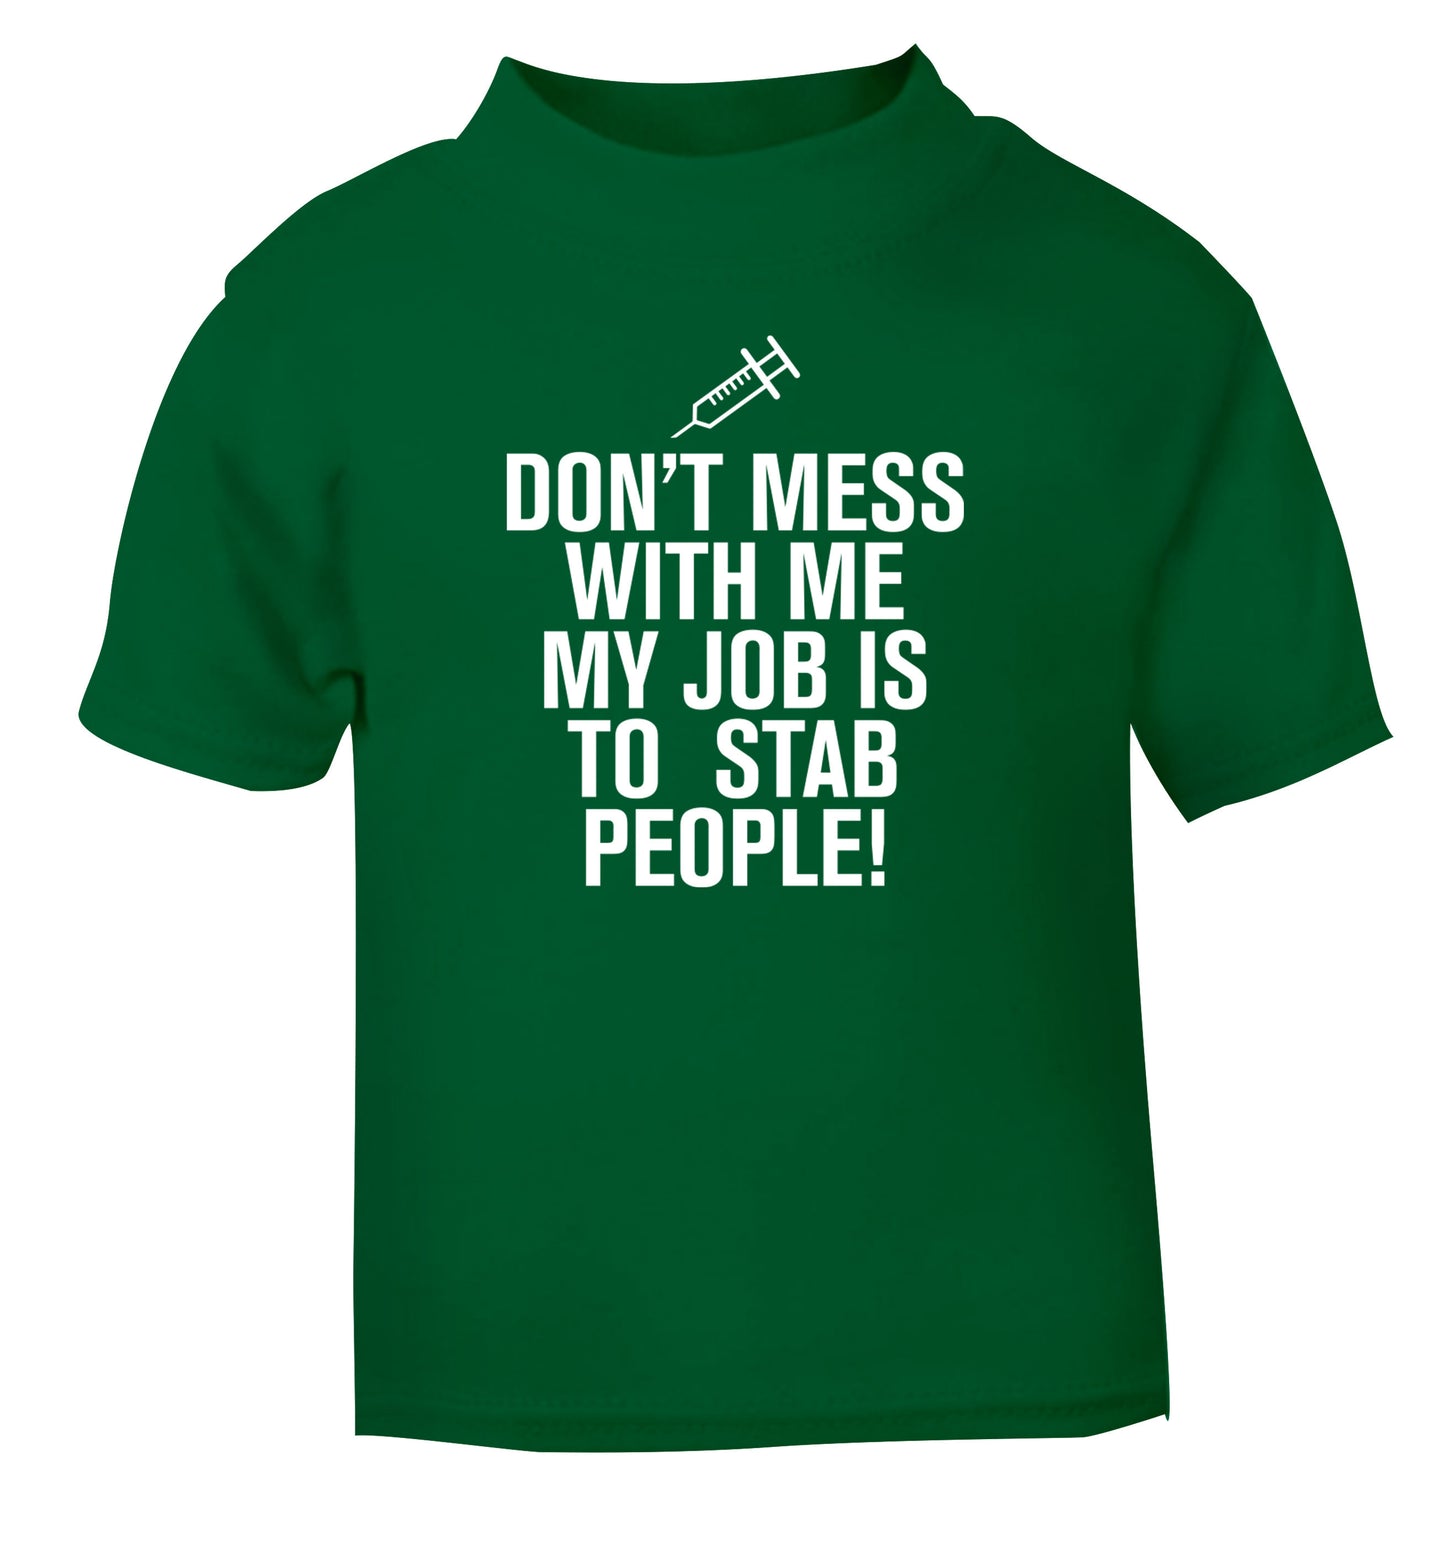 Don't mess with me my job is to stab people! green Baby Toddler Tshirt 2 Years